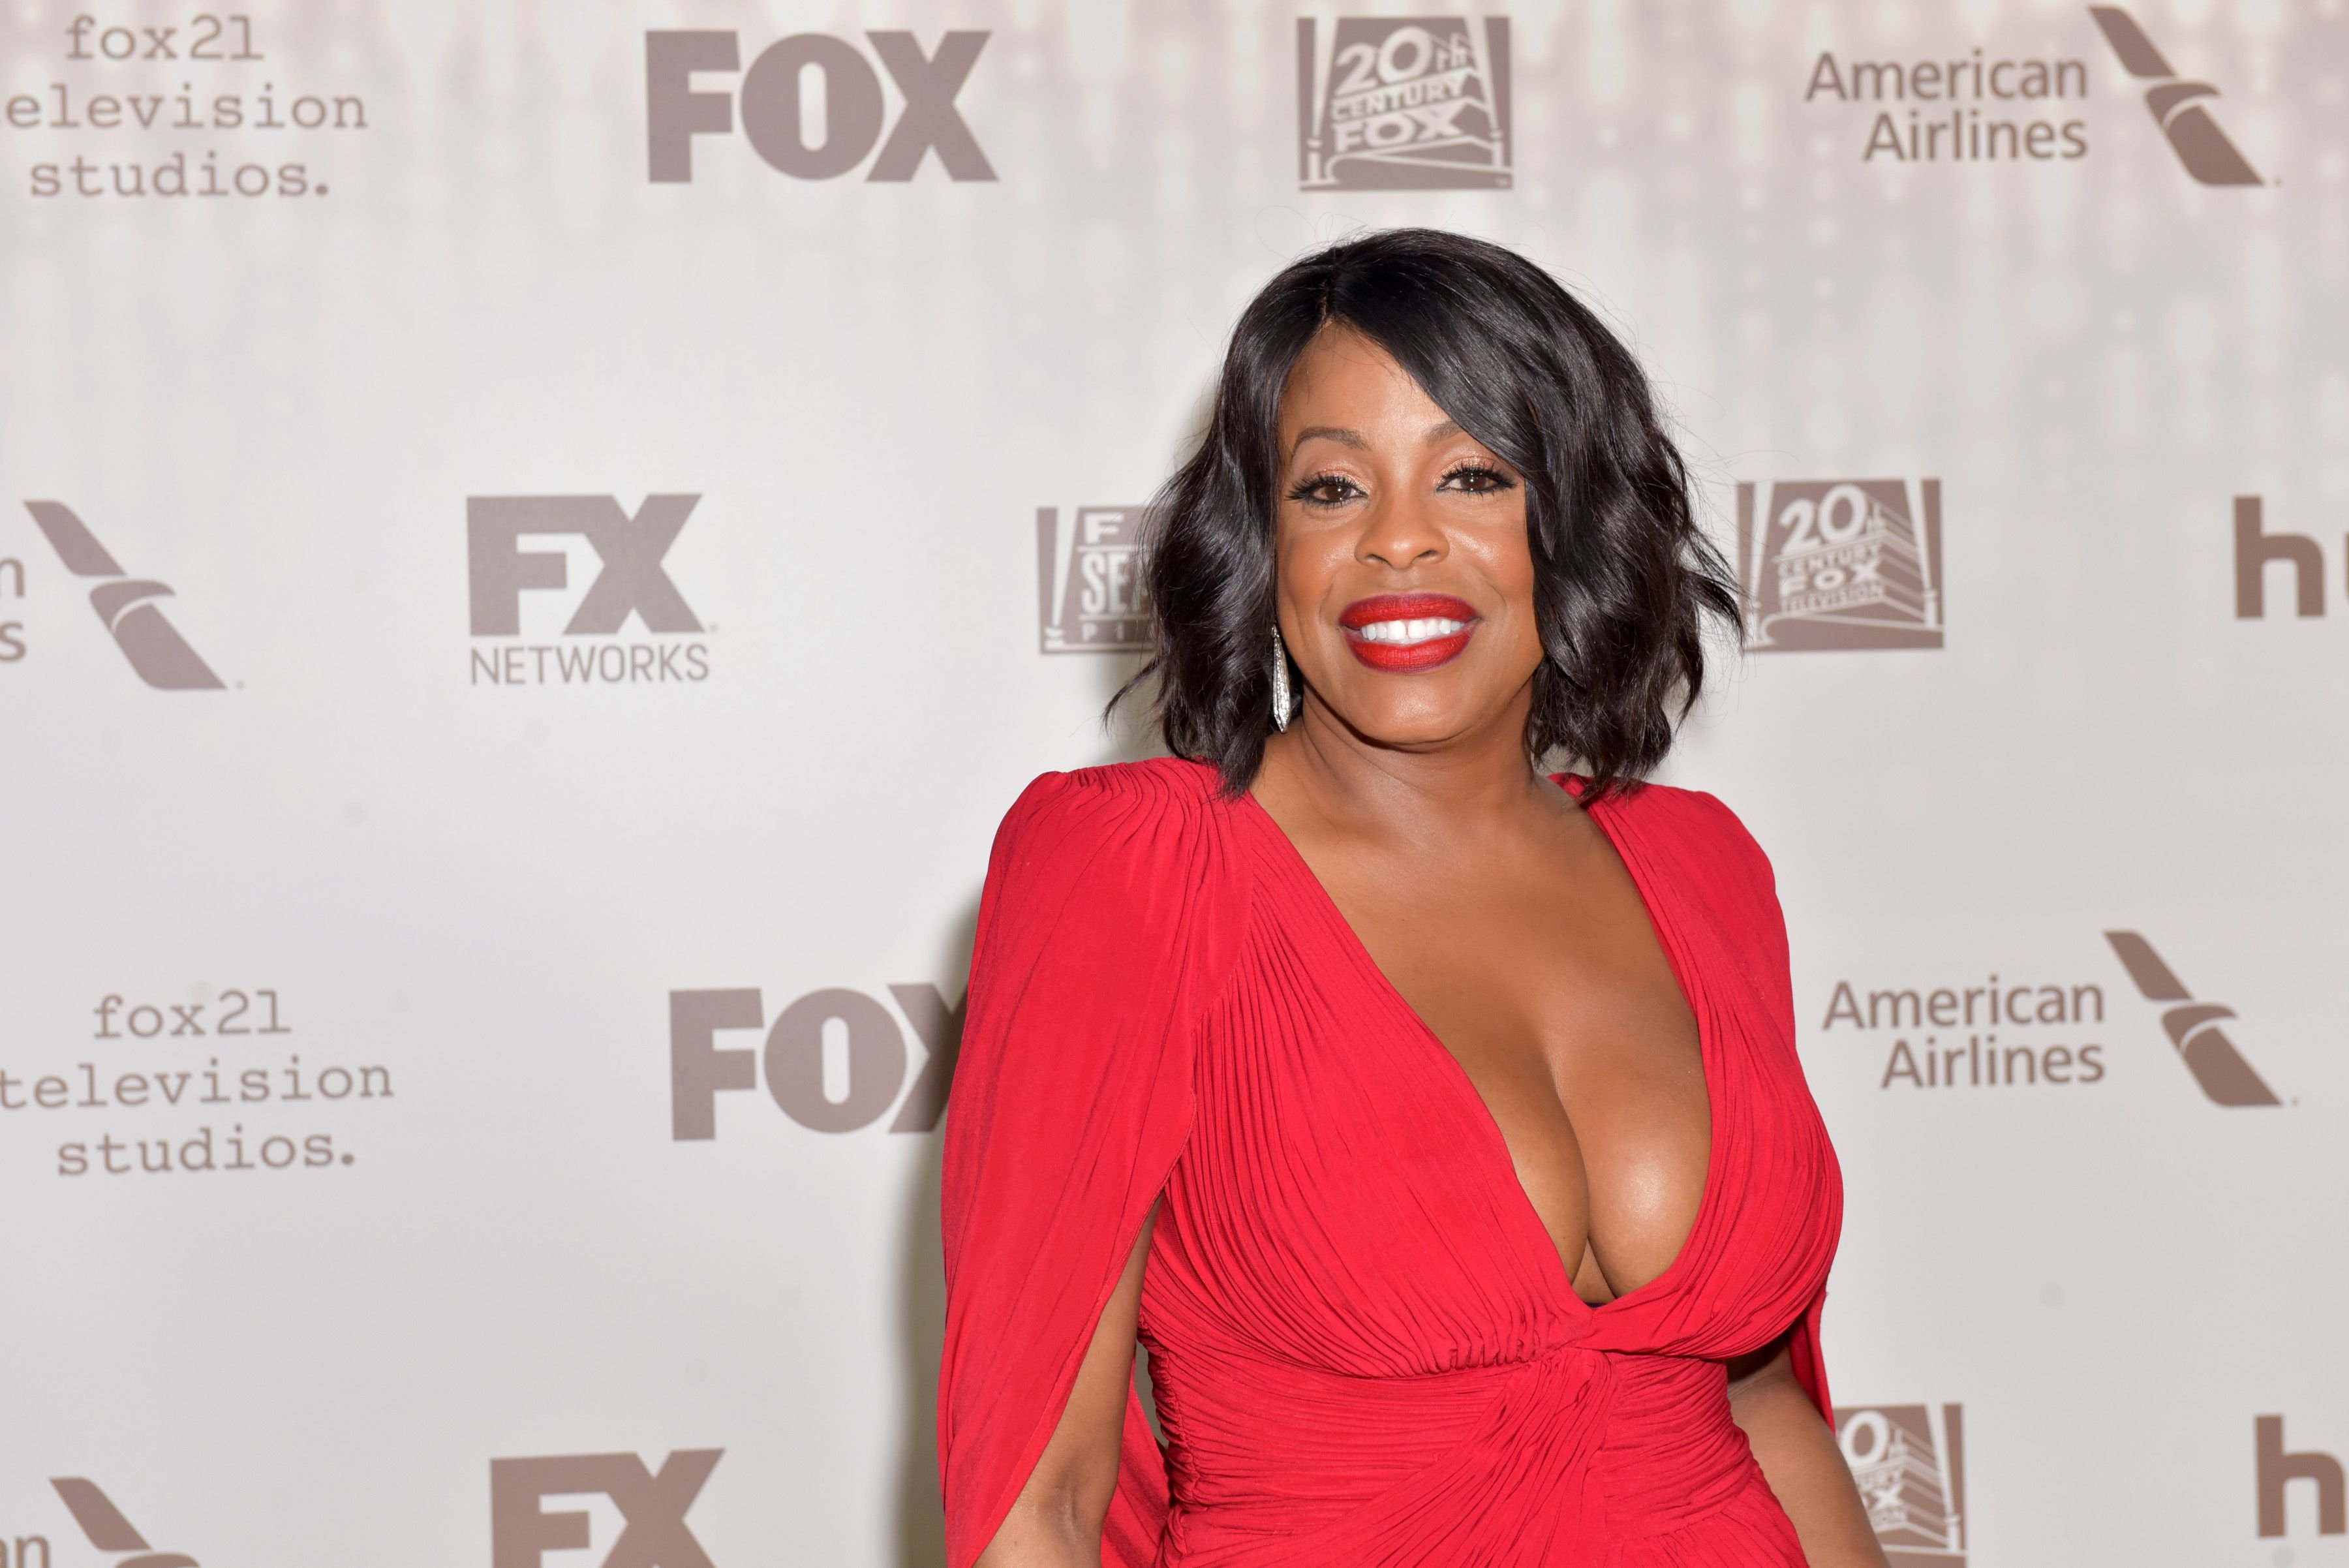 Niecy Nash during the FOX and FX's 2017 Golden Globe Awards after party at The Beverly Hilton Hotel on January 8, 2017 in Beverly Hills, California. | Source: Getty Images